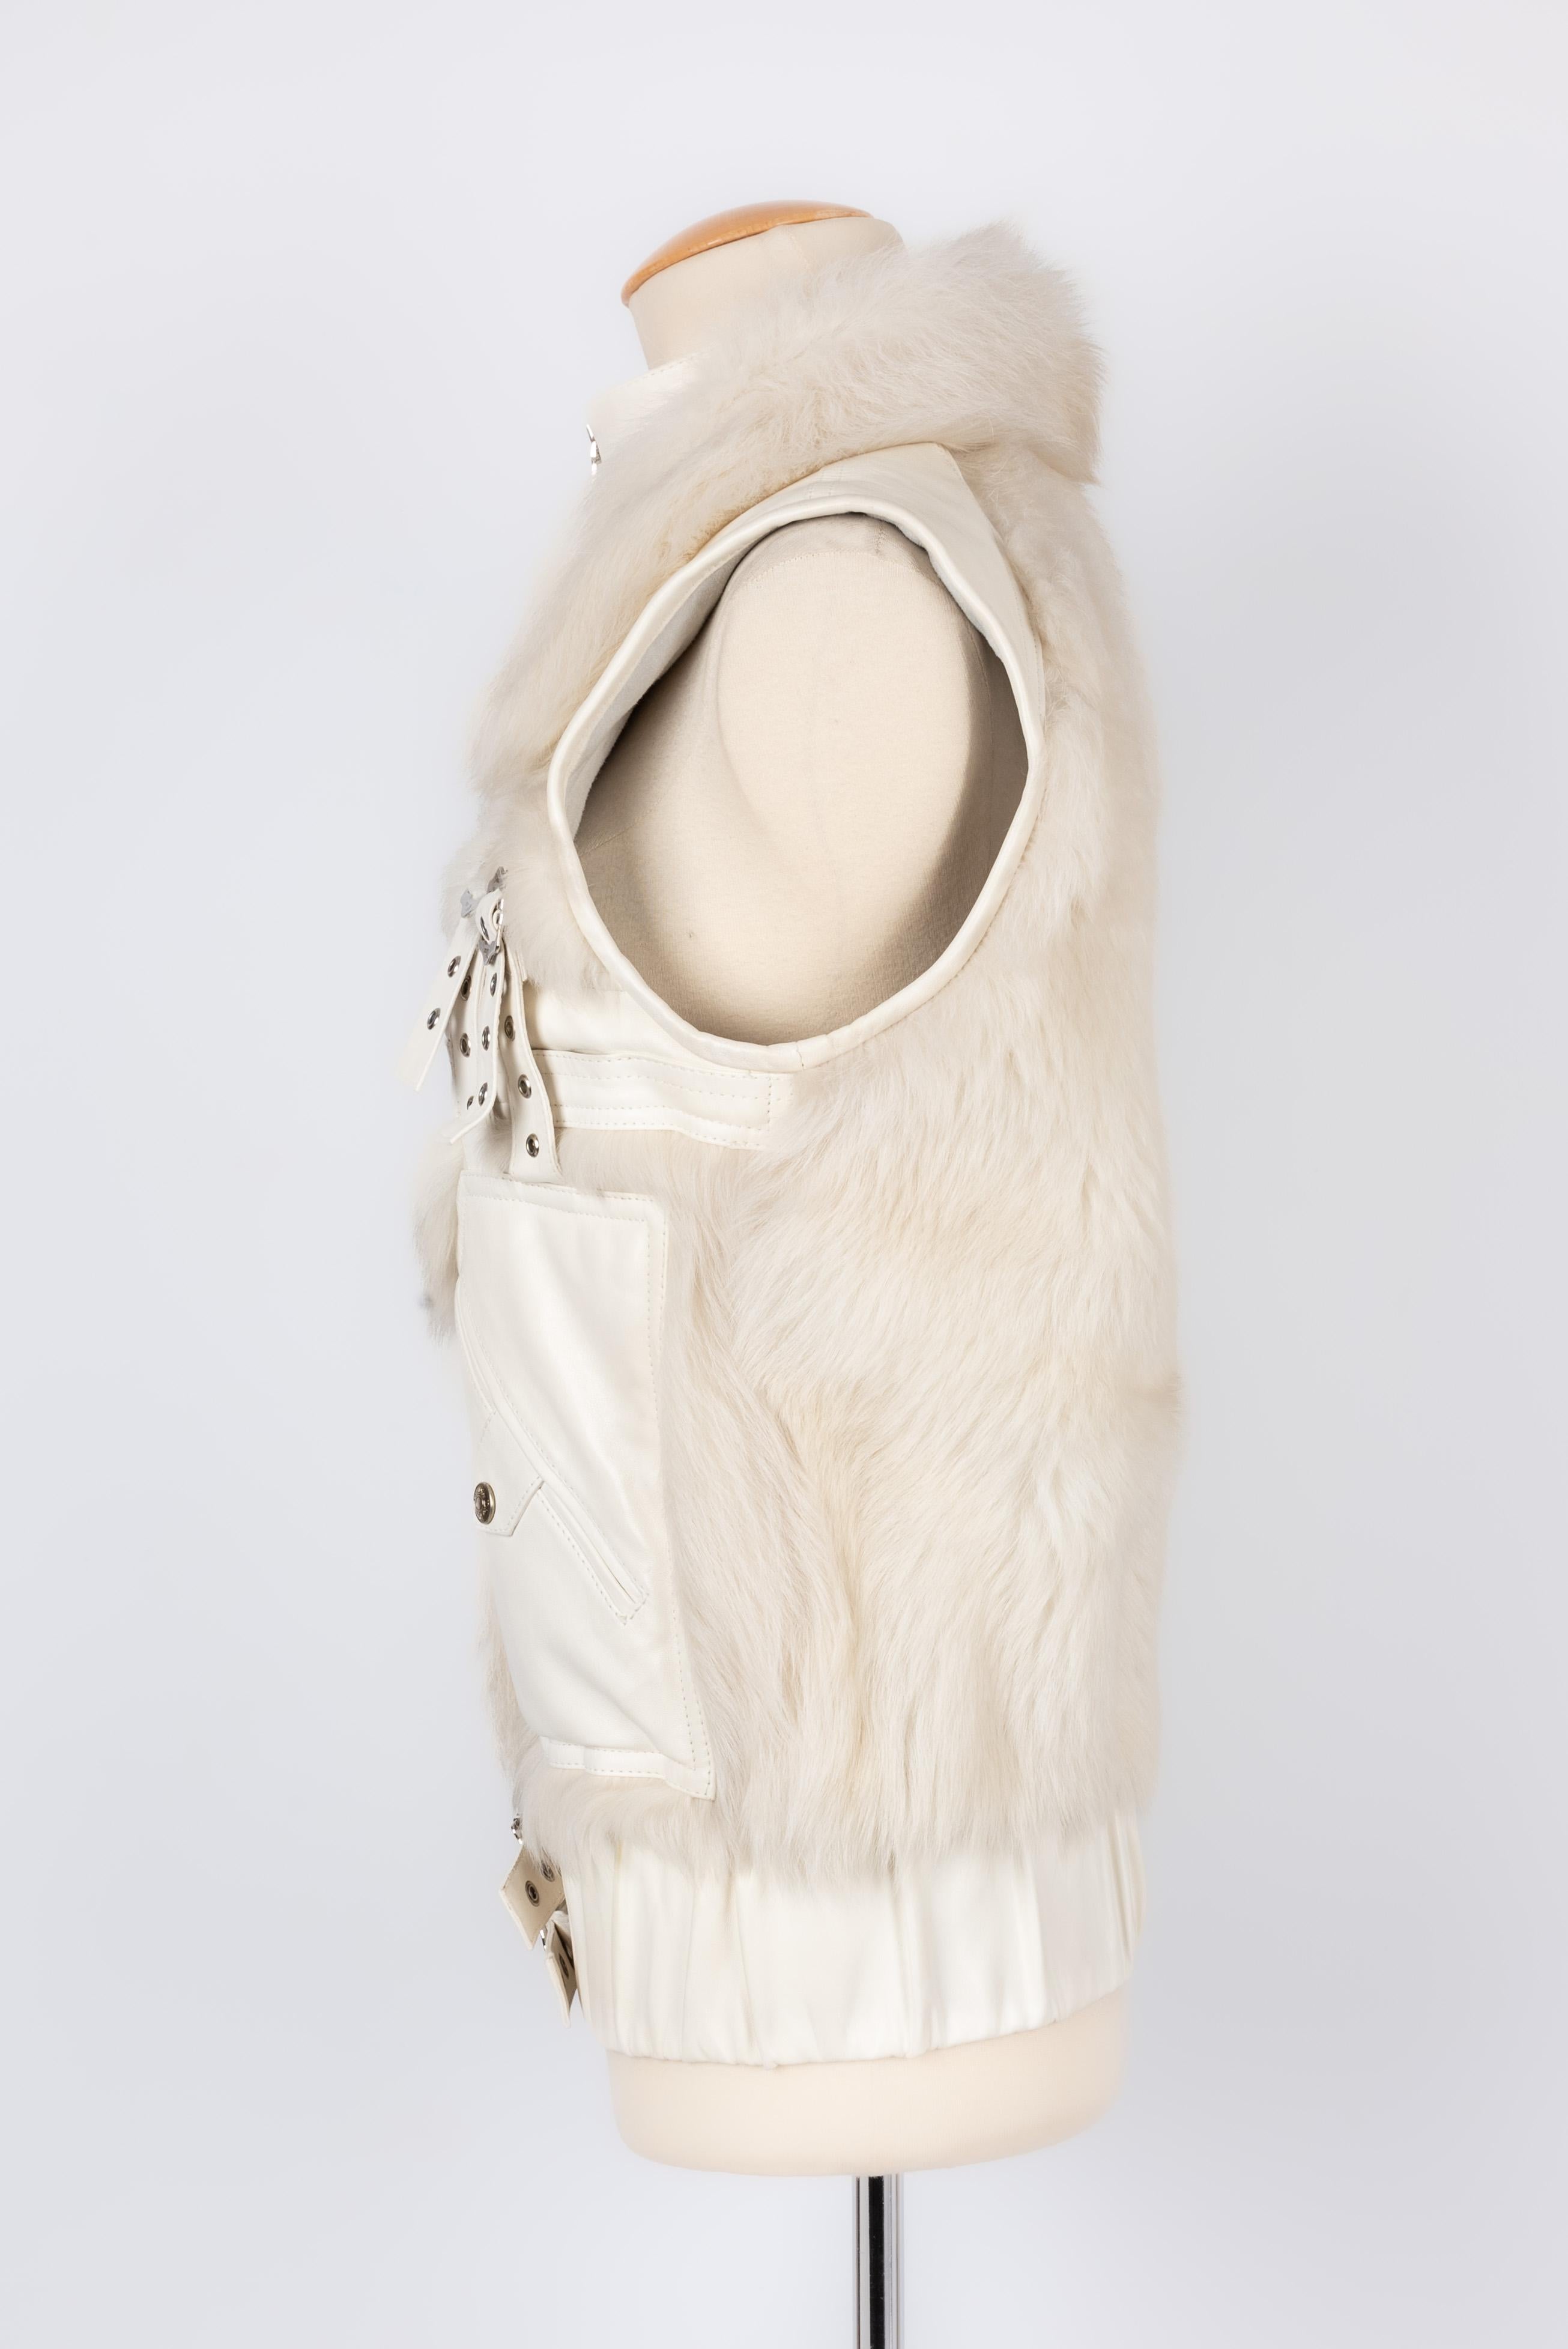 DIOR - (Made in France) Sleeveless jacket in lamb leather and white faux fur. 
Size36FR. 
Fall-Winter 2003 Ready-to-Wear Collection.

Condition:
Very good condition

Dimensions:
Chest: 47 cm - Length: 63 cm

FV167

With her expertise in vintage